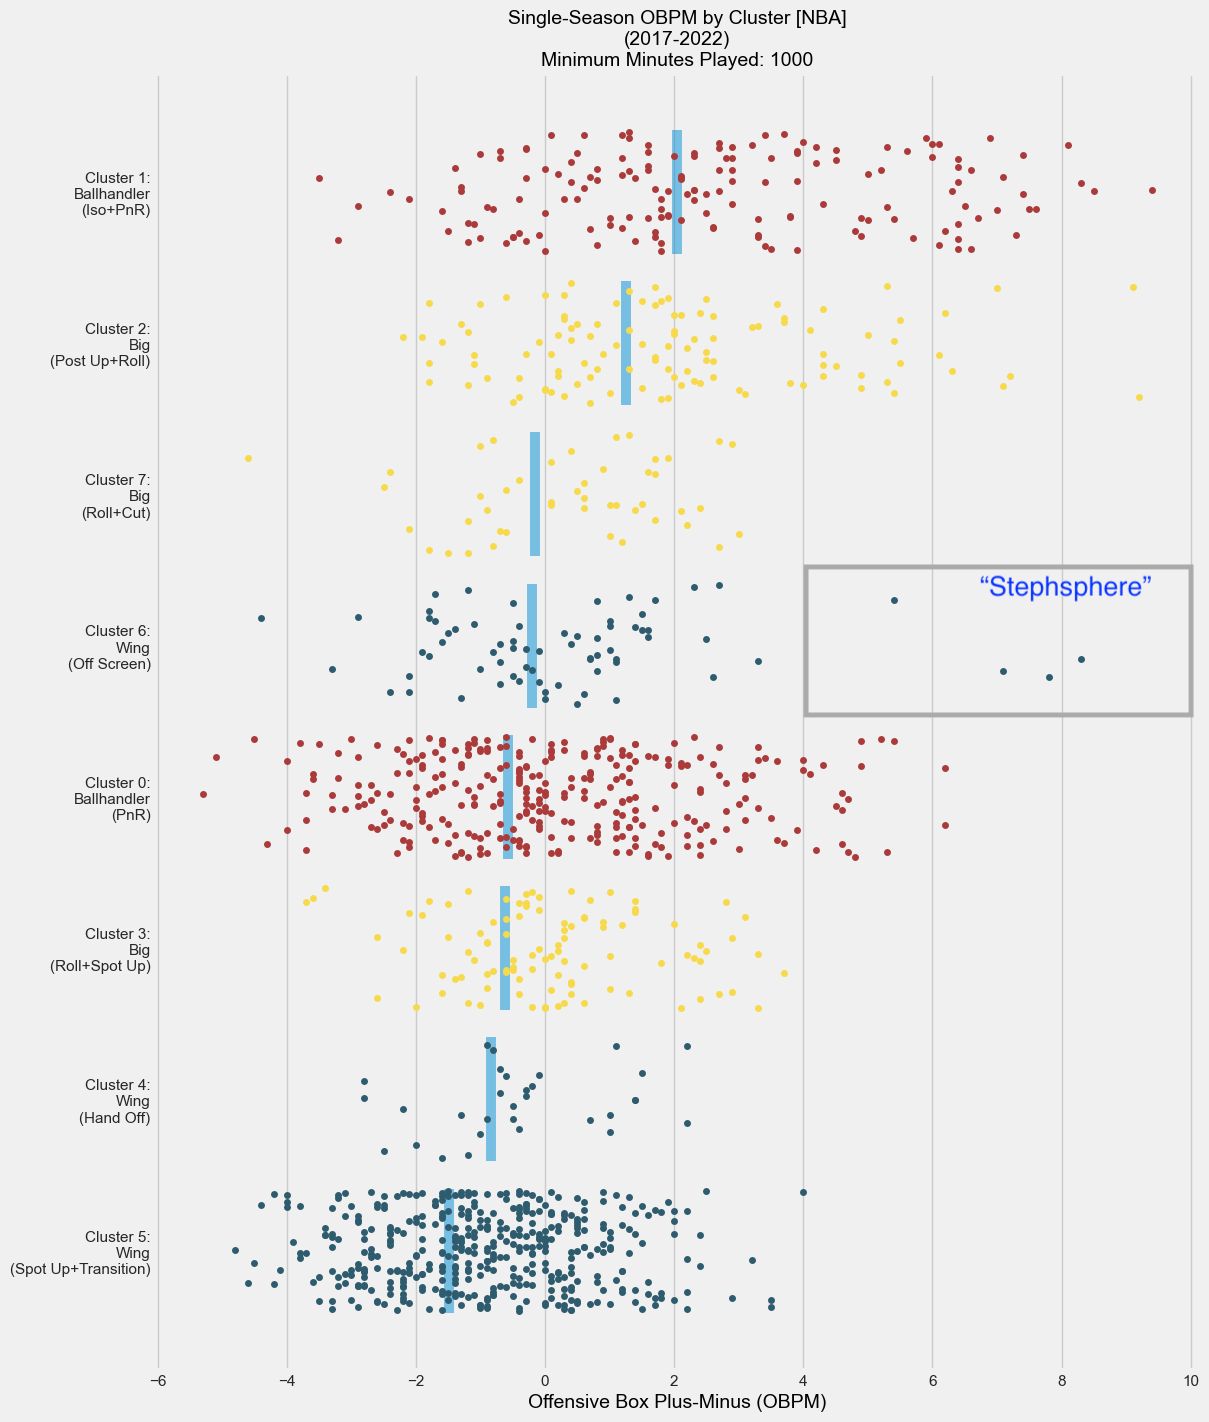 Clustering NBA Offensive Styles